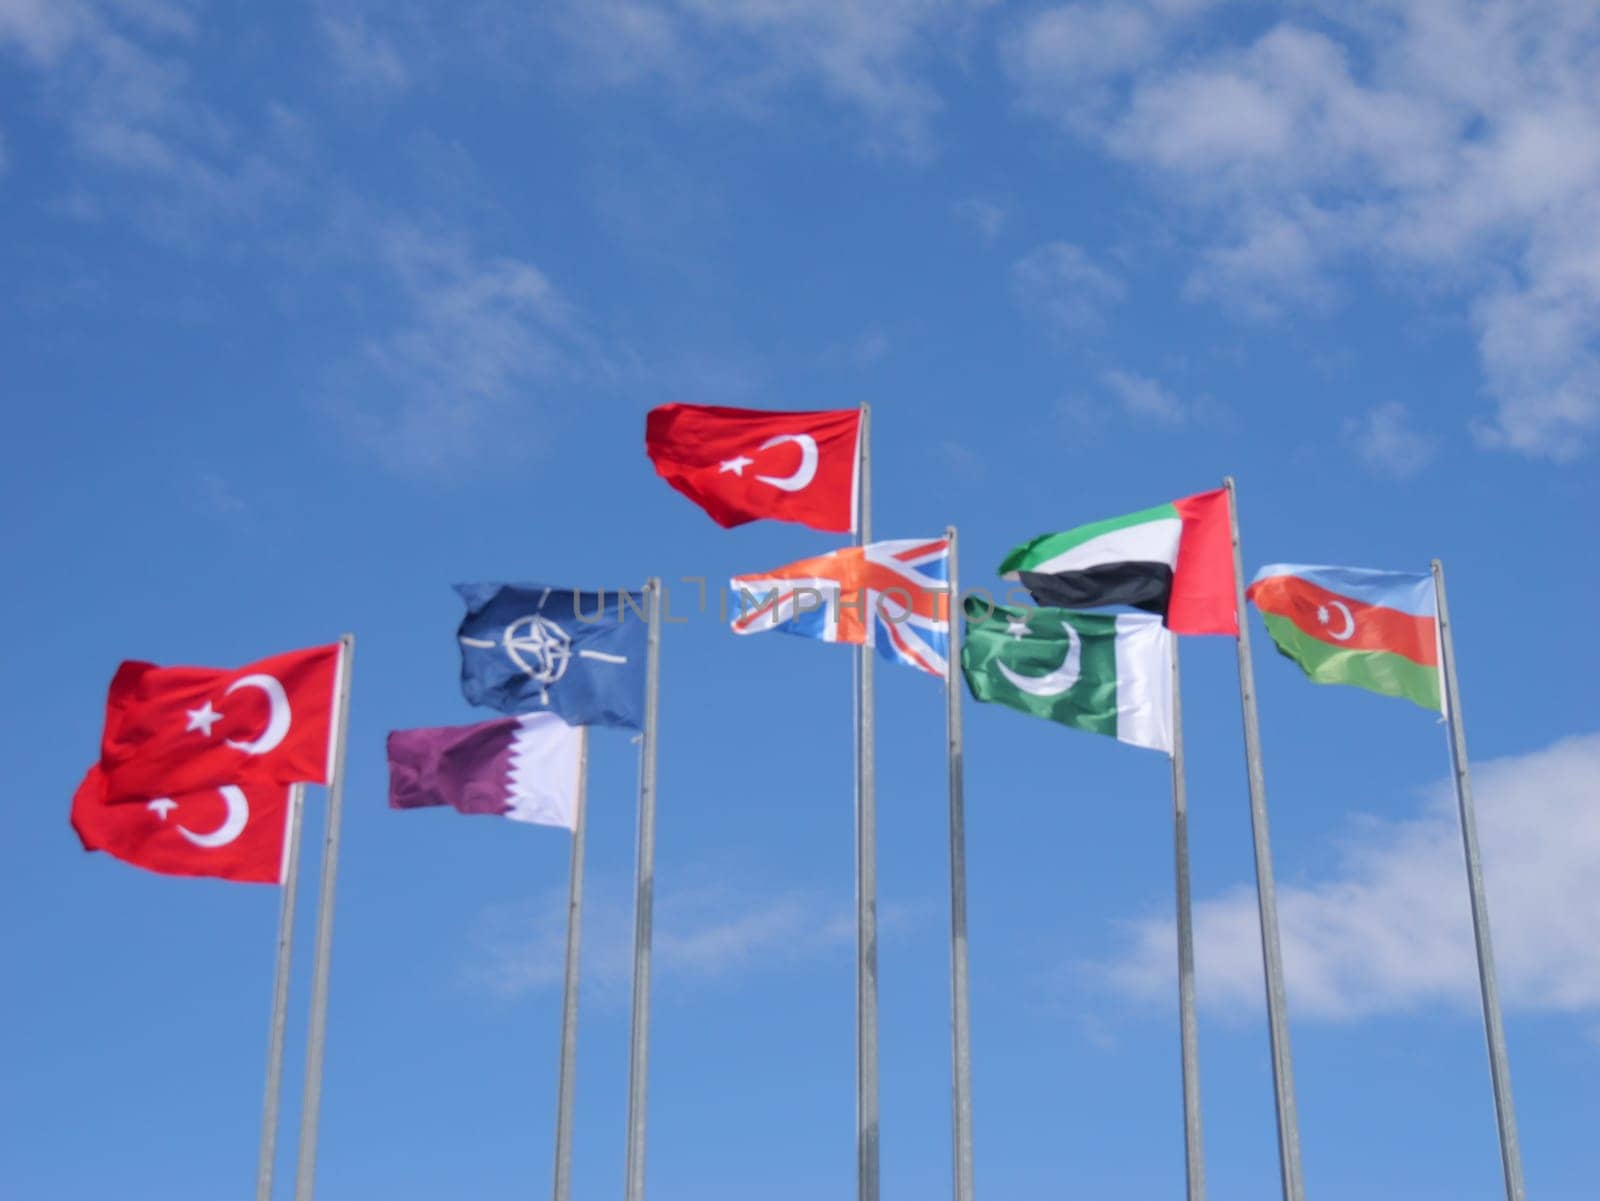 An array of flags from Turkey, Qatar, the United Kingdom, the United Arab Emirates, and Azerbaijan, along with the NATO emblem, captured in motion under the bright sunlight.